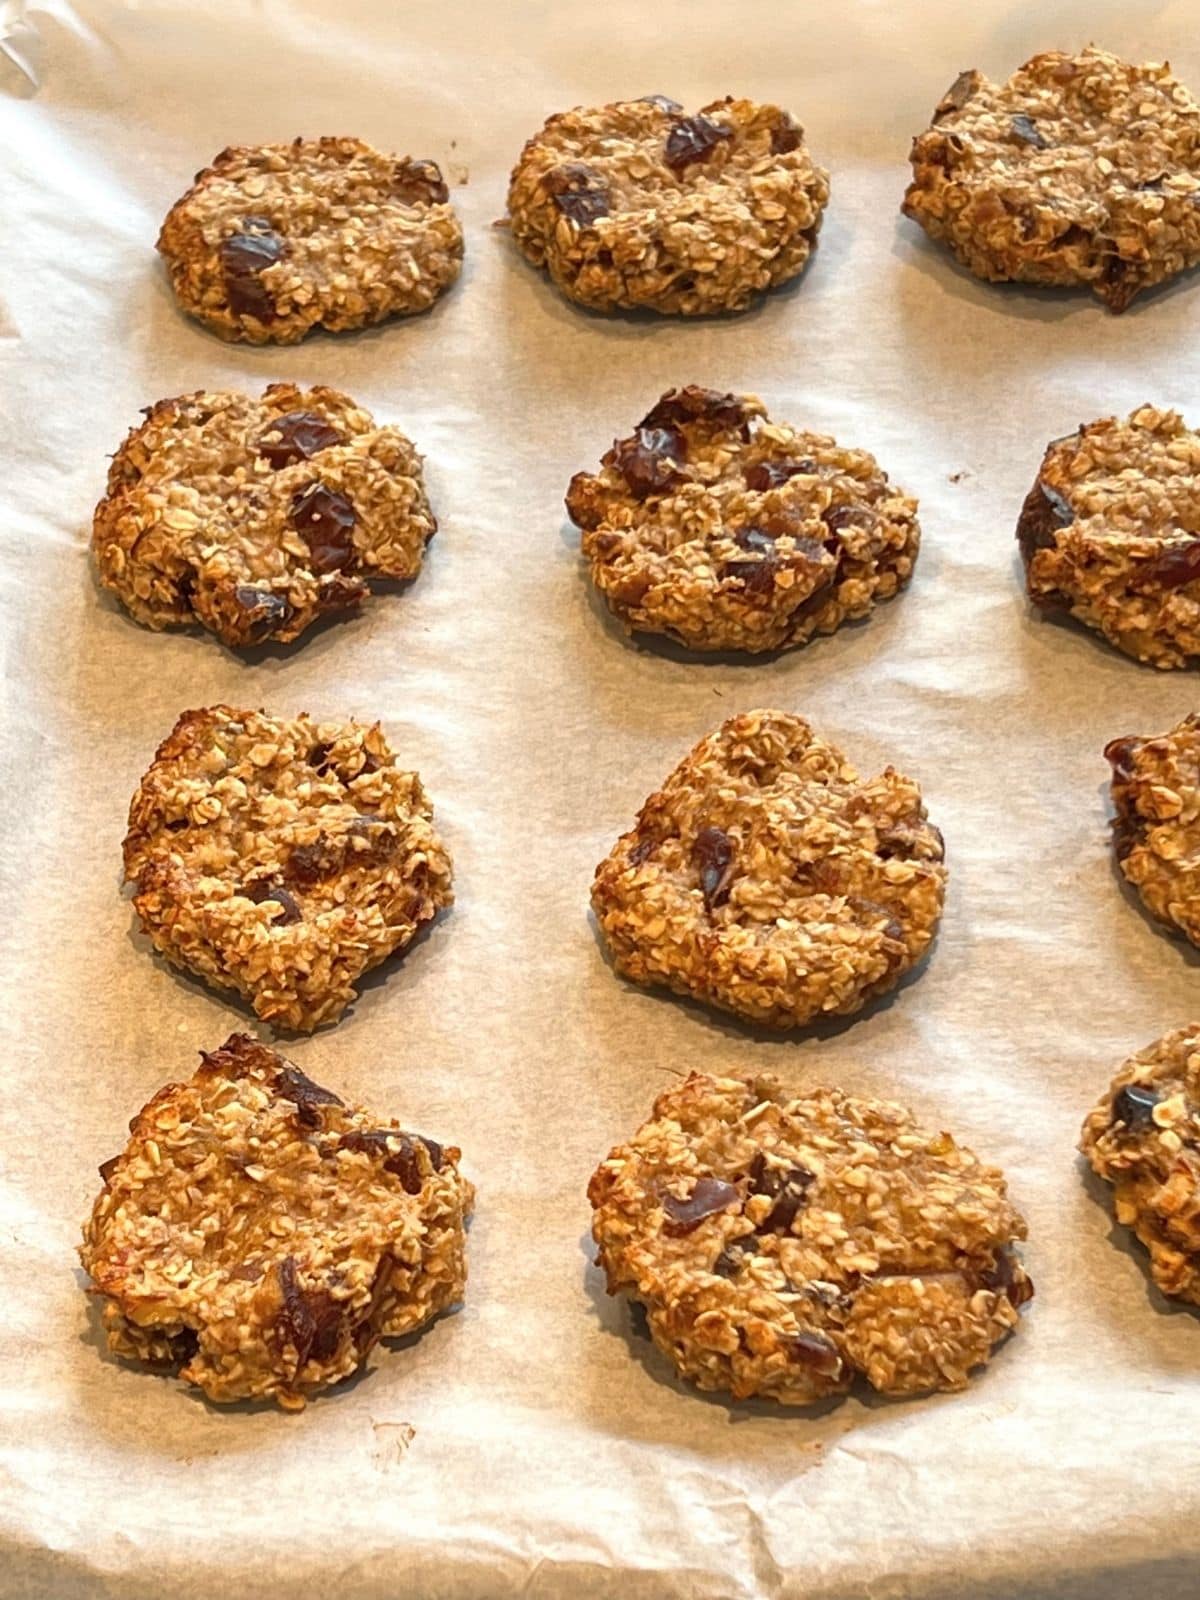 Baked oat cookies on a lined baking sheet.